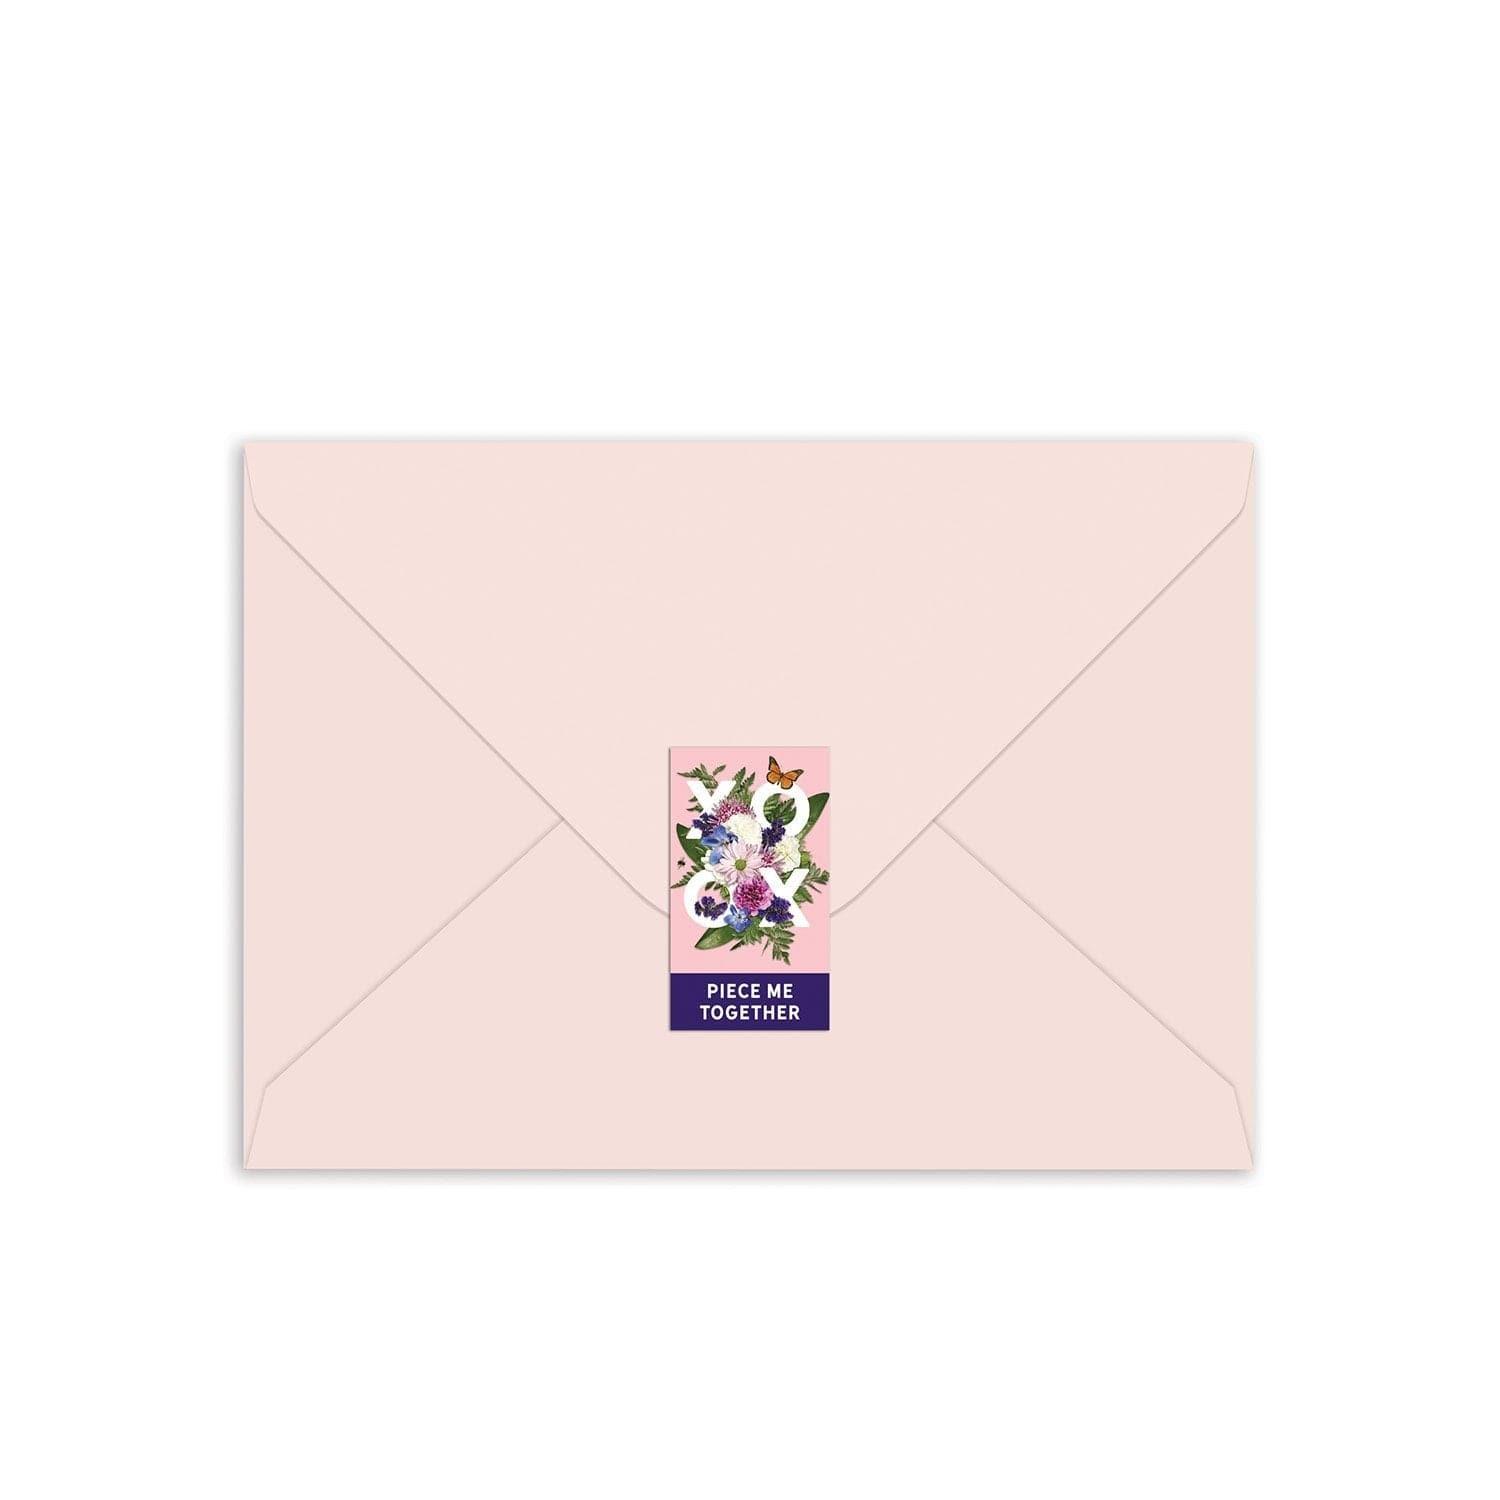 Say It with Flowers Greeting Assortment Notecard Box